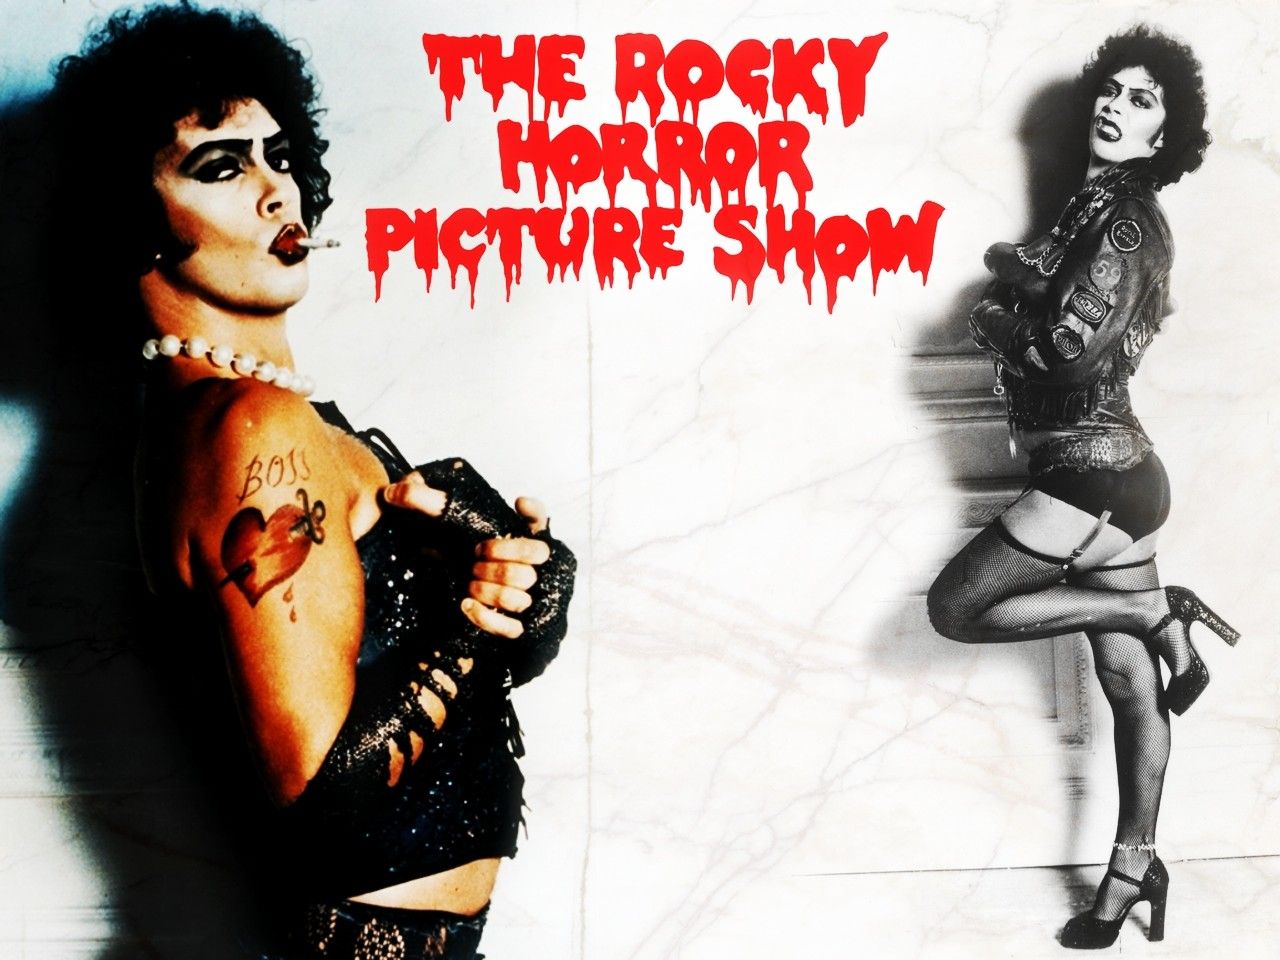 Free download rocky horror picture show [1280x960]